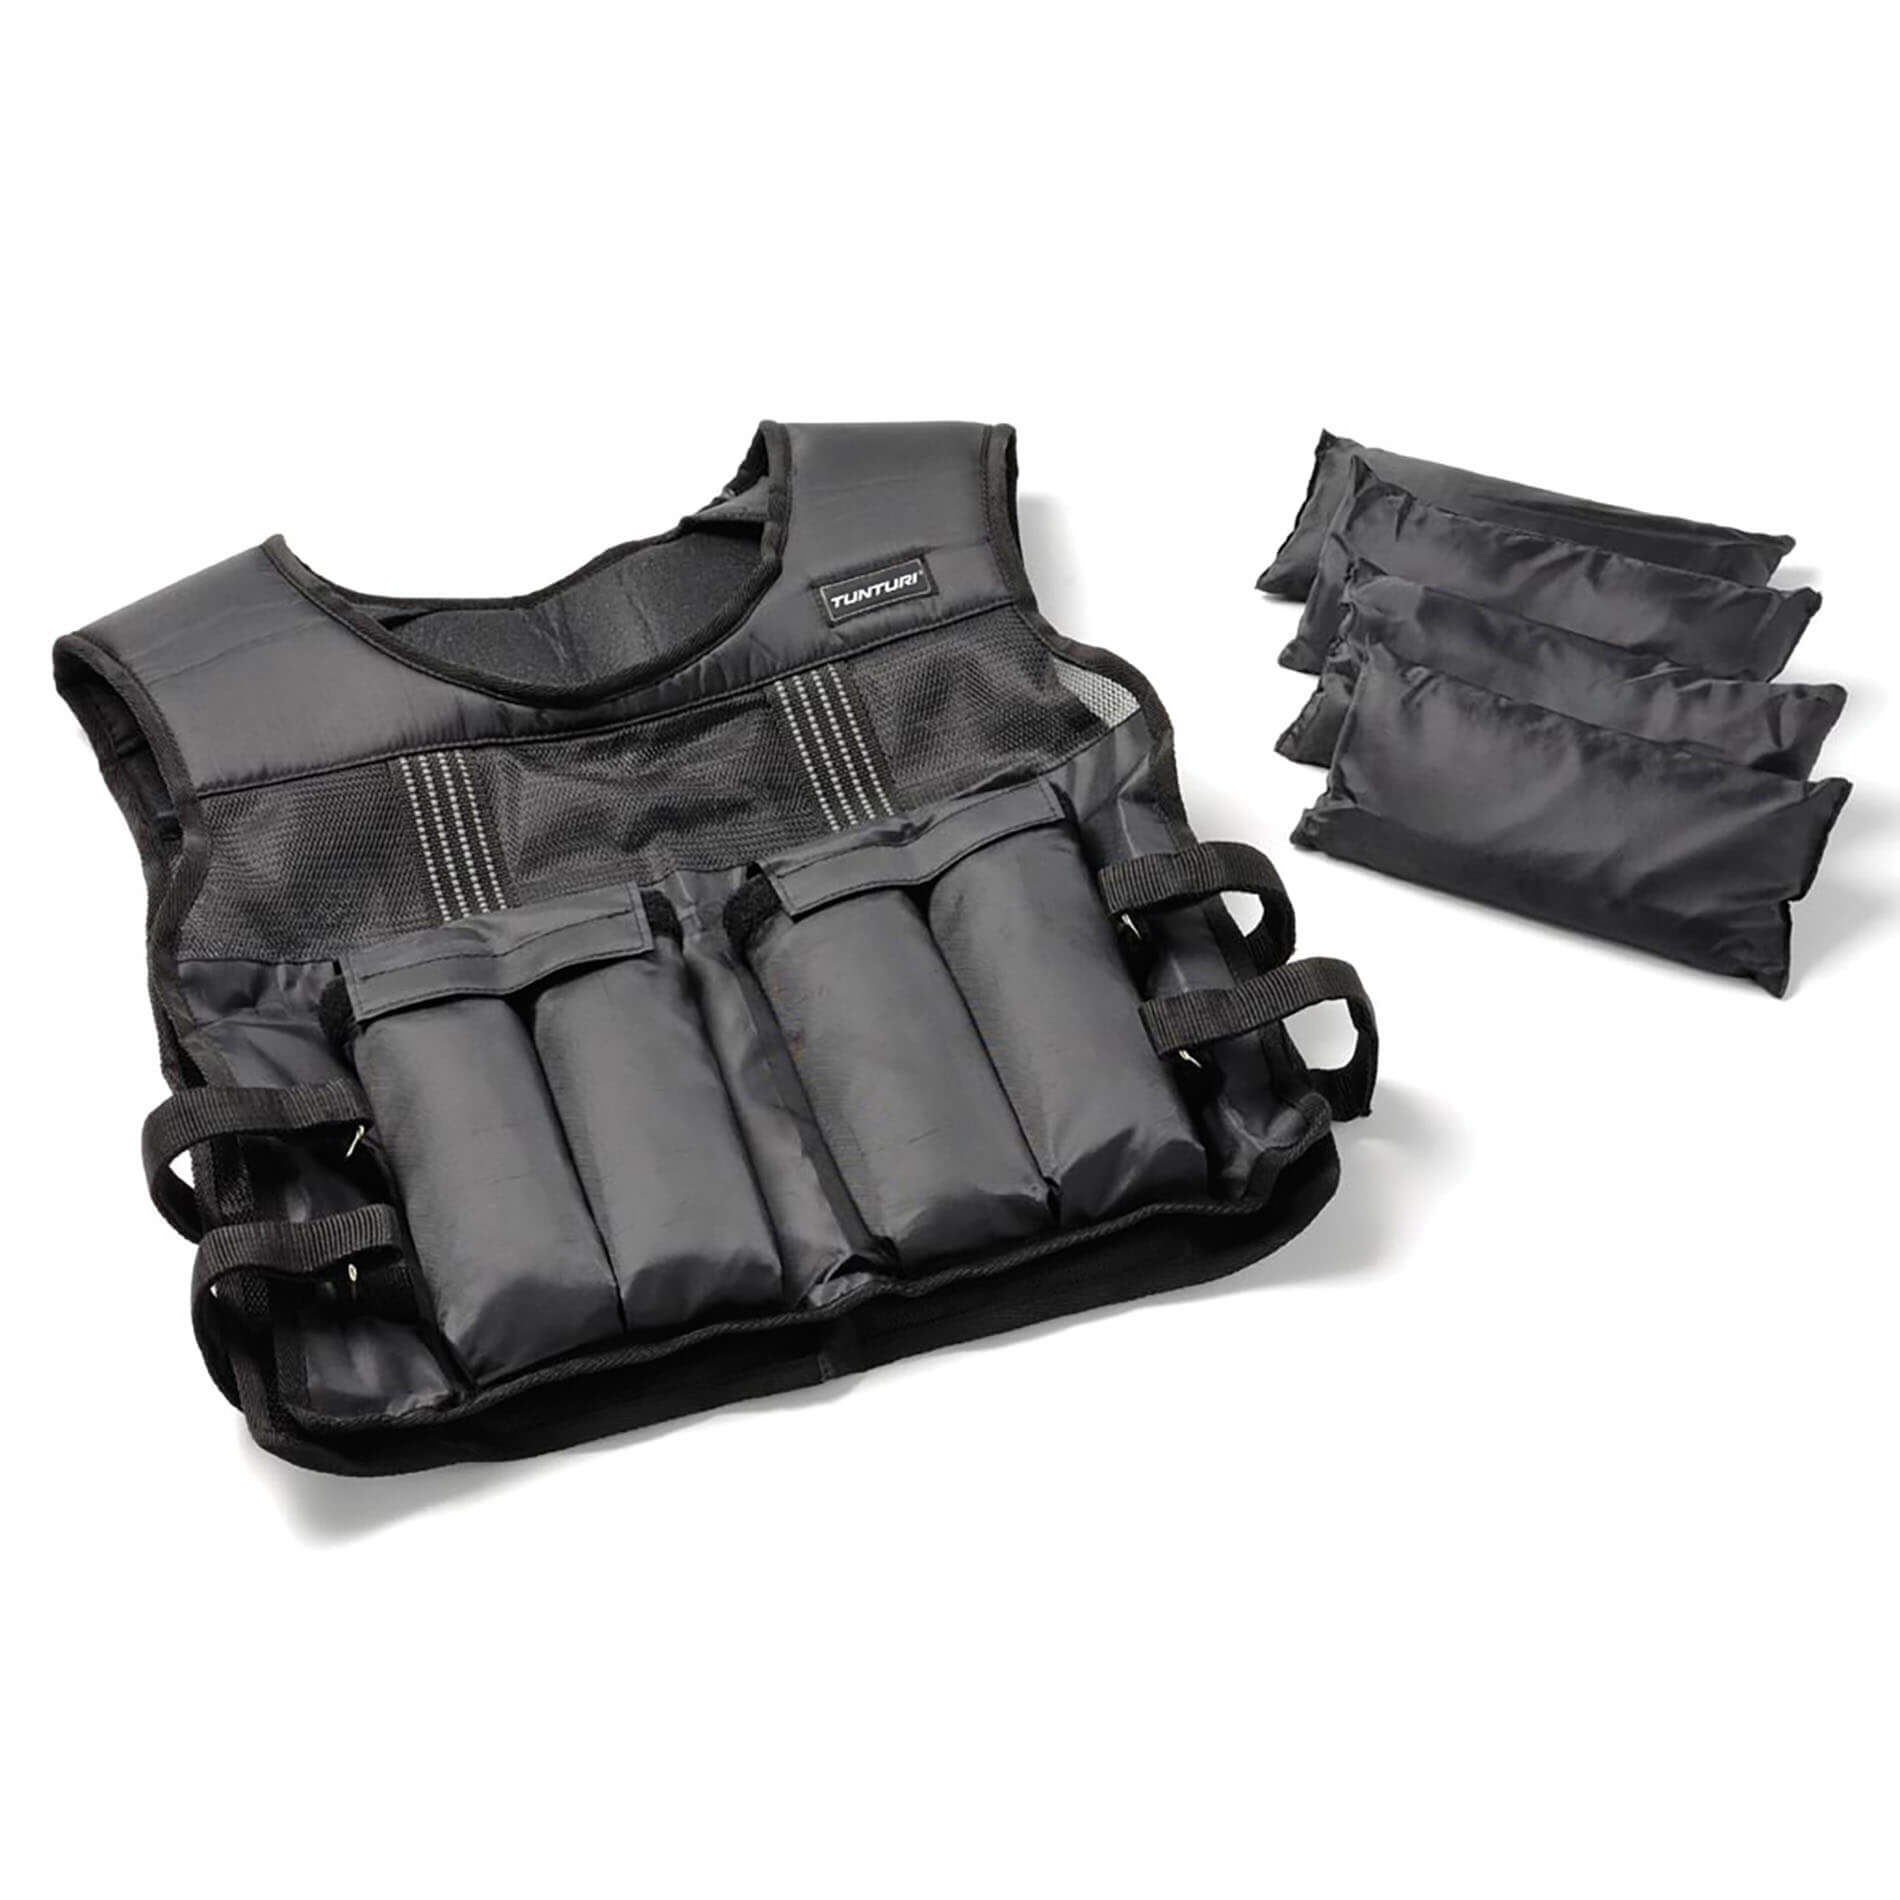 Weighted Vest Coupons & Discounts